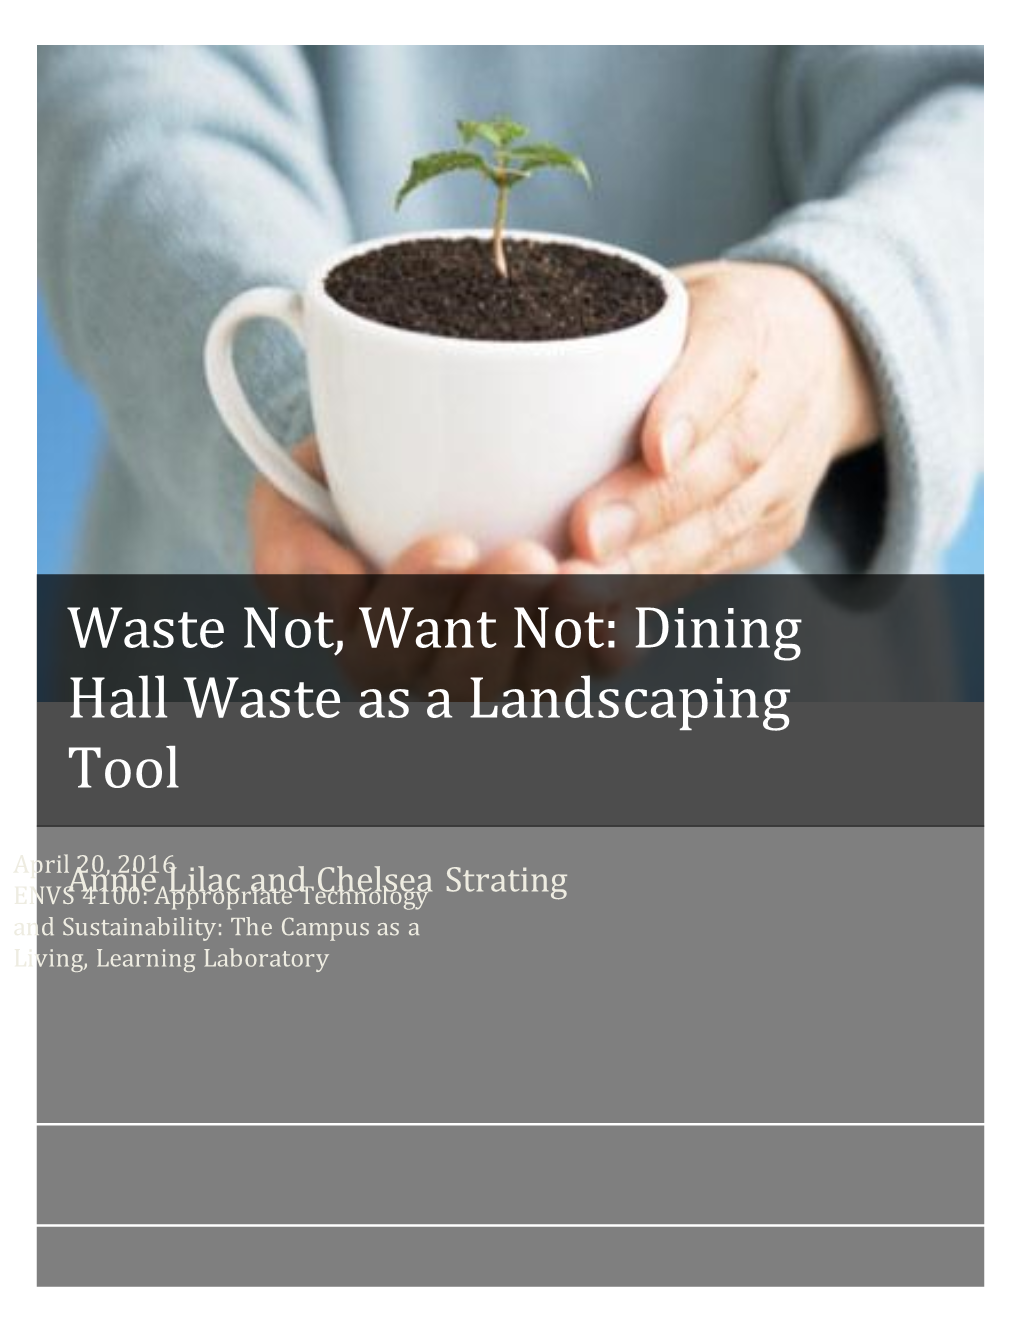 Dining Hall Waste As a Landscaping Tool